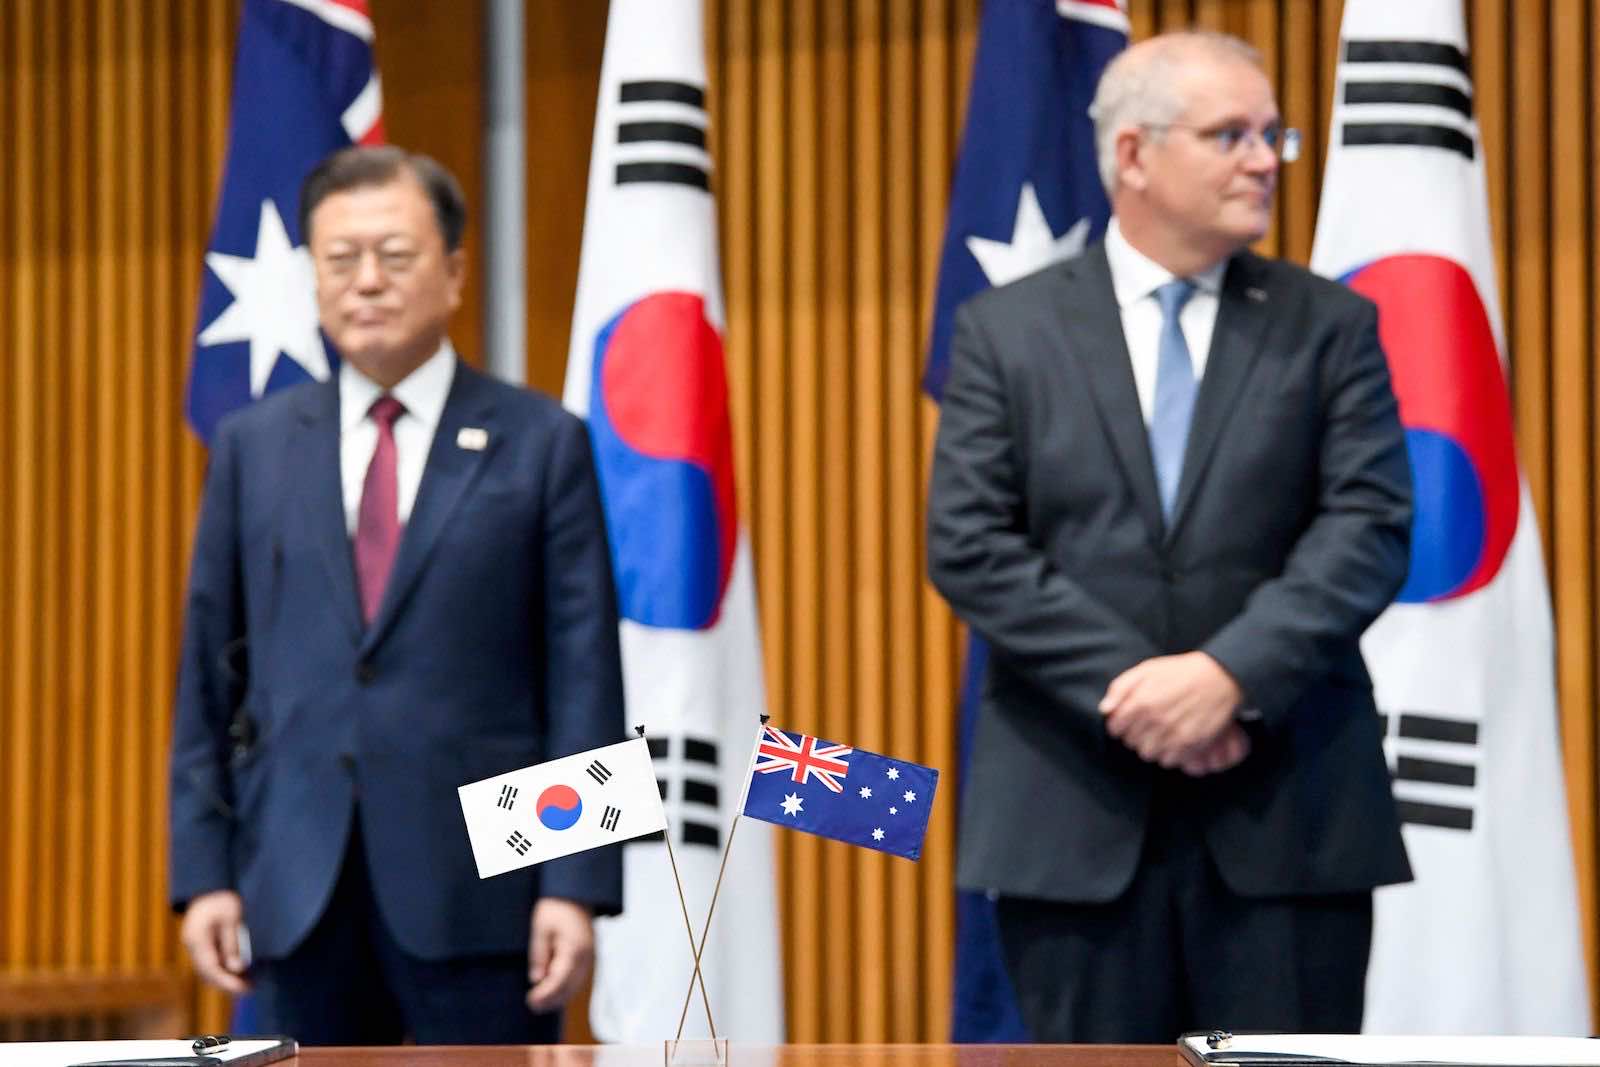 South Korean President Moon Jae-in and Australian Prime Minister Scott Morrison at Parliament House in Canberra last month (Lukas Coch/AFP via Getty Images)